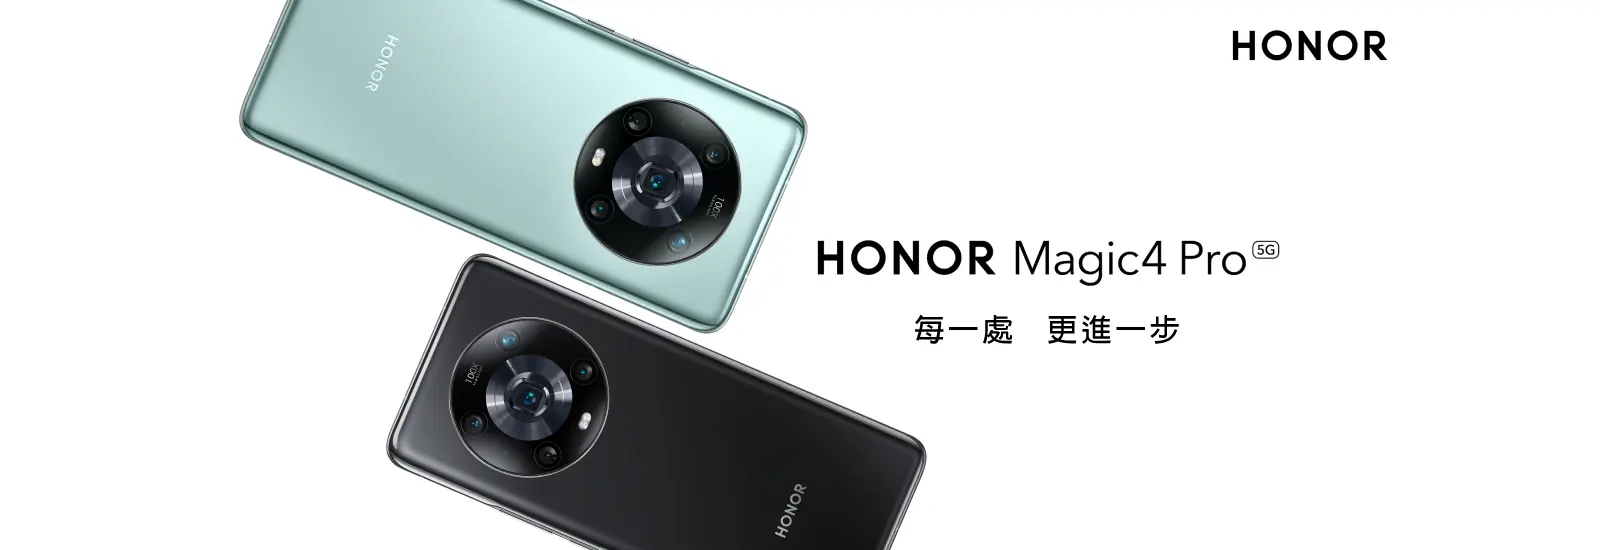 HONOR Magic4 Pro 5G 256GB, add-on $269/mth up upon SIM subscription / contract renewal